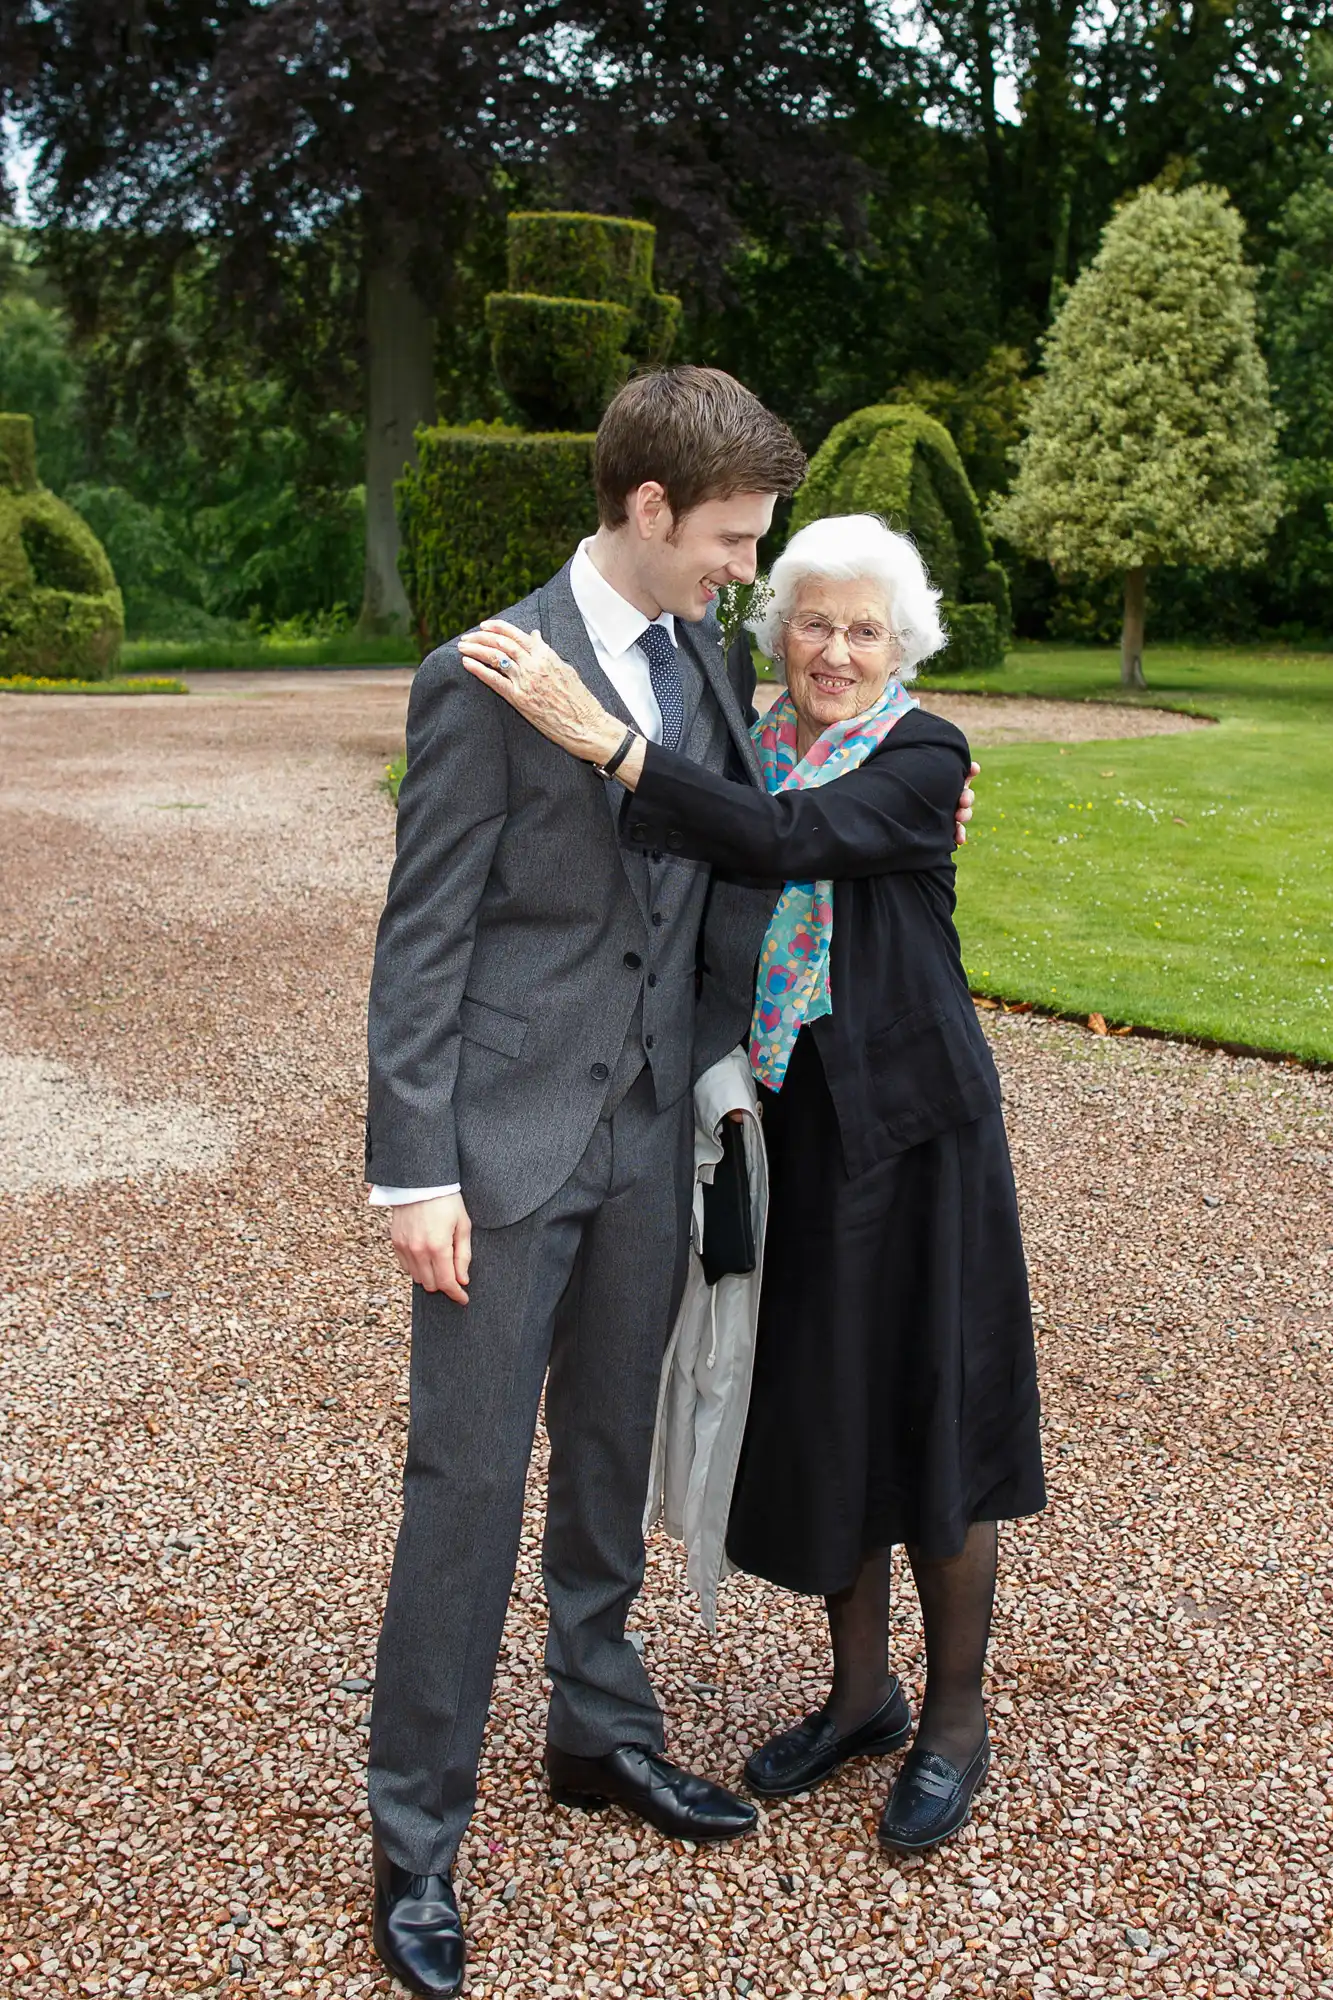 A young man in a suit and an elderly woman in a black dress and colorful scarf embrace, smiling, in a garden with topiary trees.